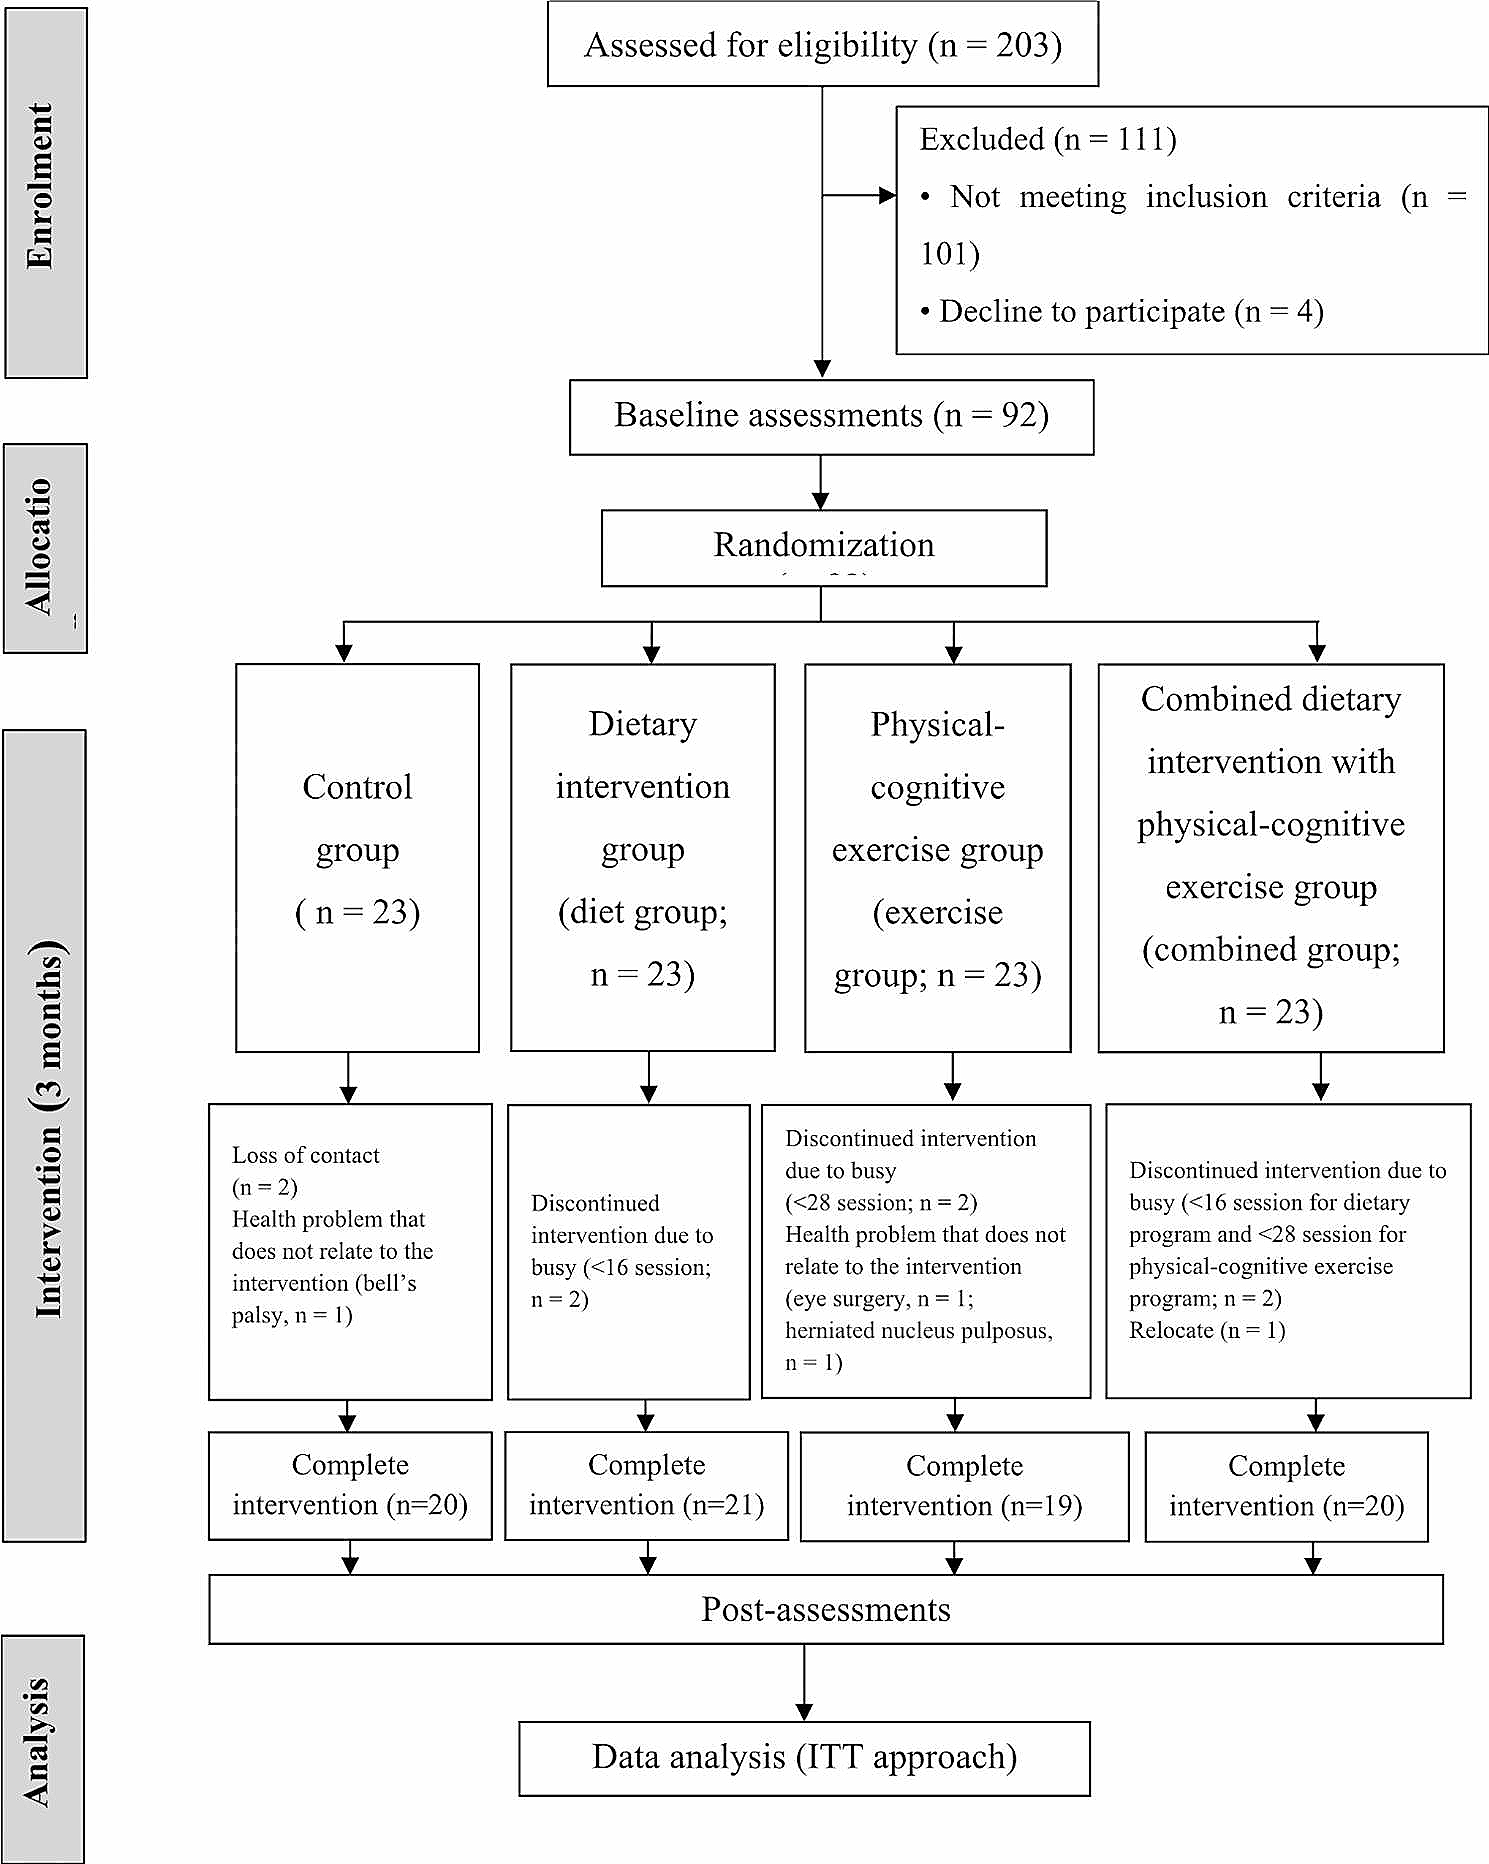 Effects of combined dietary intervention and physical-cognitive exercise on cognitive function and cardiometabolic health of postmenopausal women with obesity: a randomized controlled trial